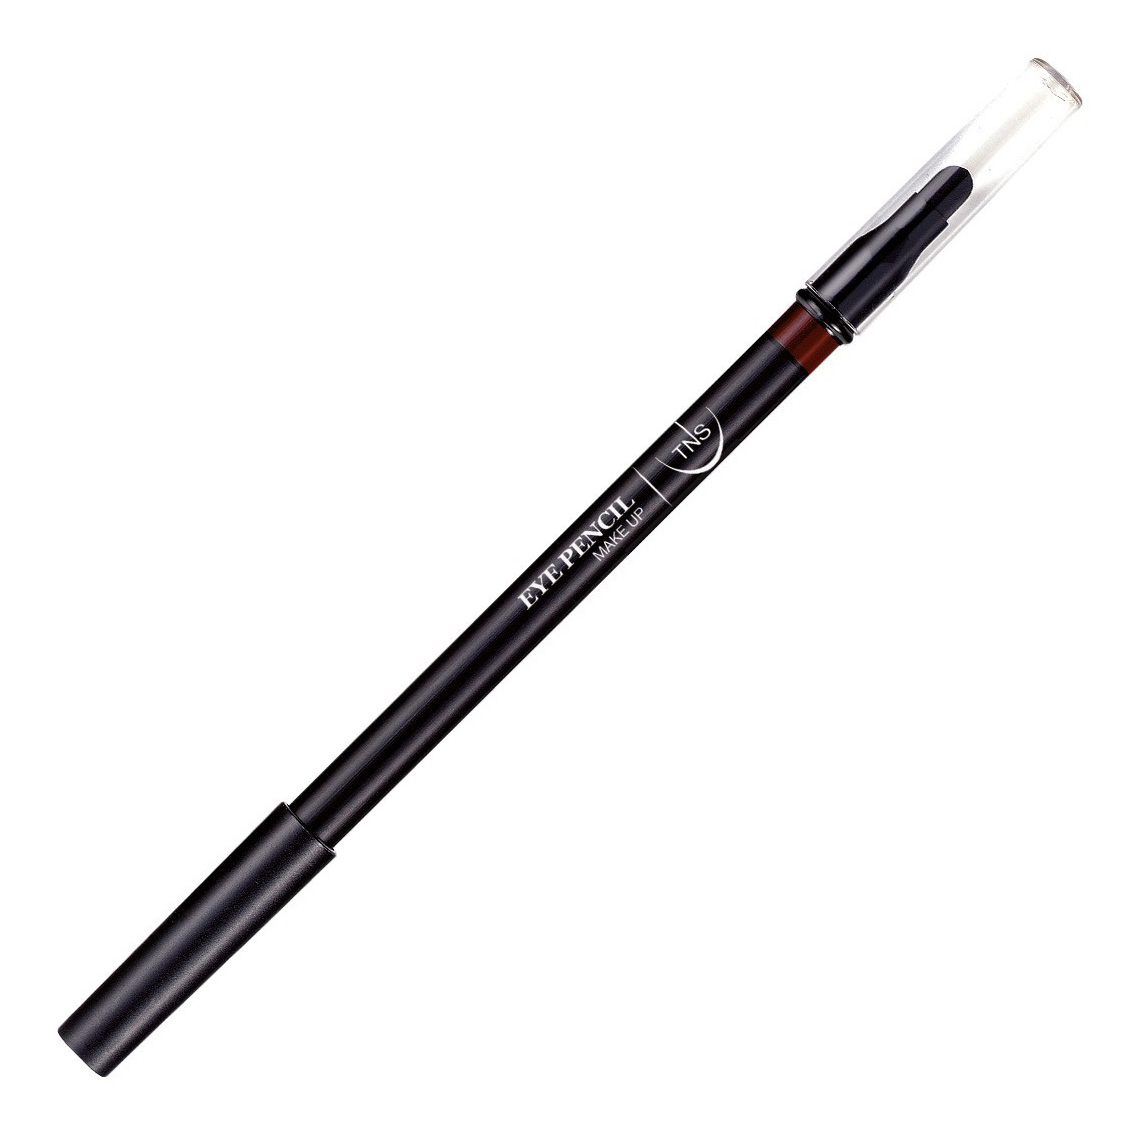 TNS Pencil for eye make-up colour brown